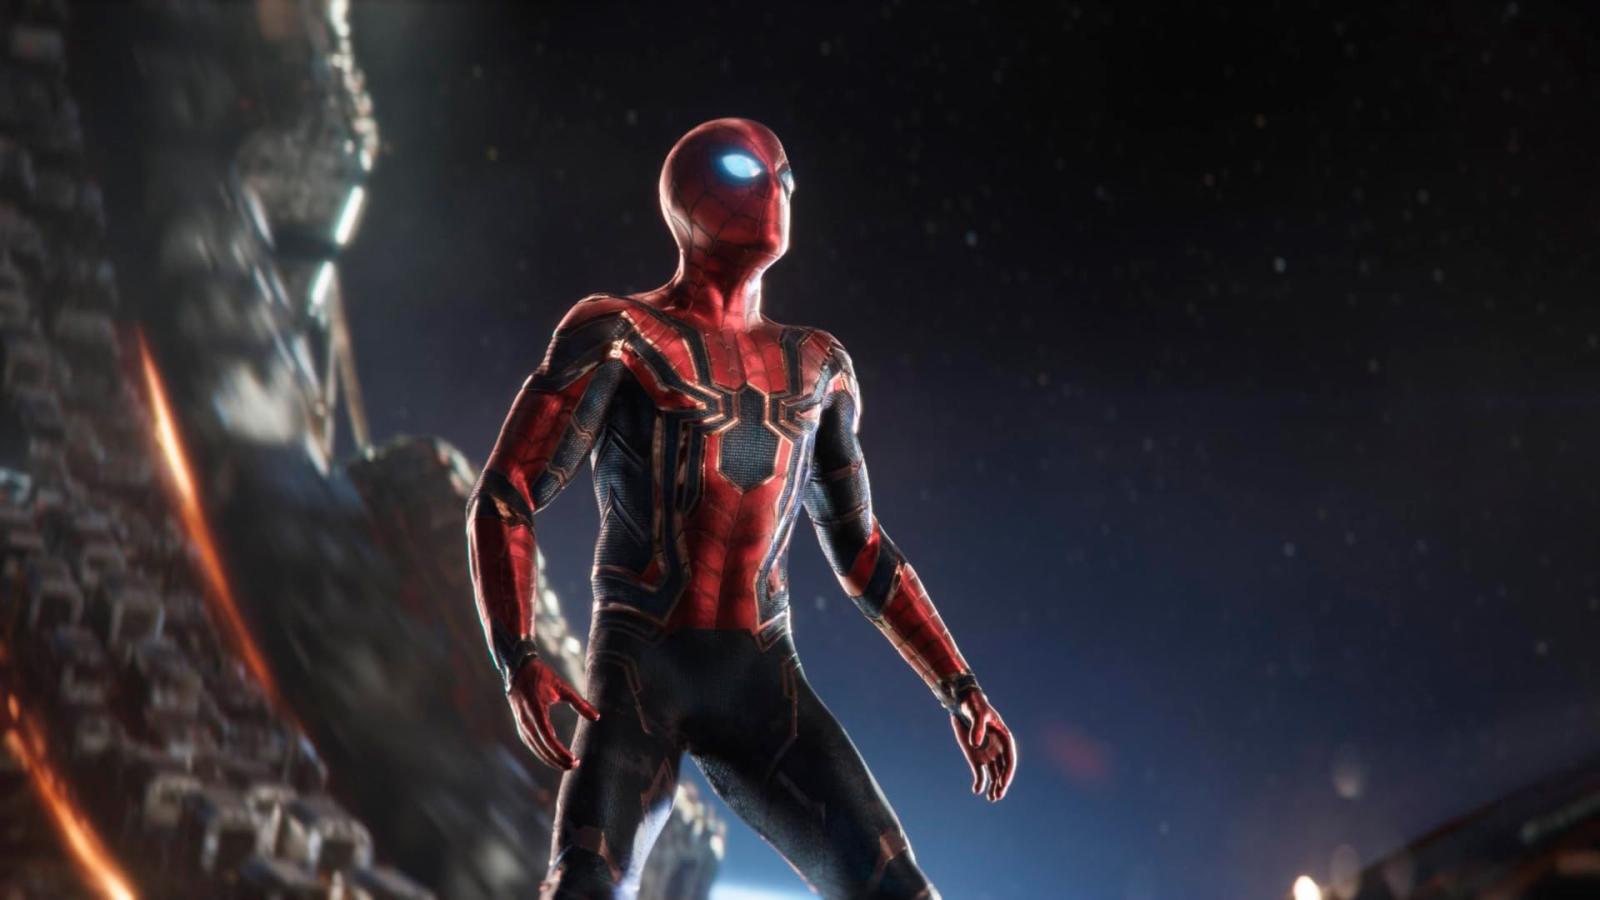 All 8 Spider-Man Suits in MCU, Ranked by How Cool They Look - image 1